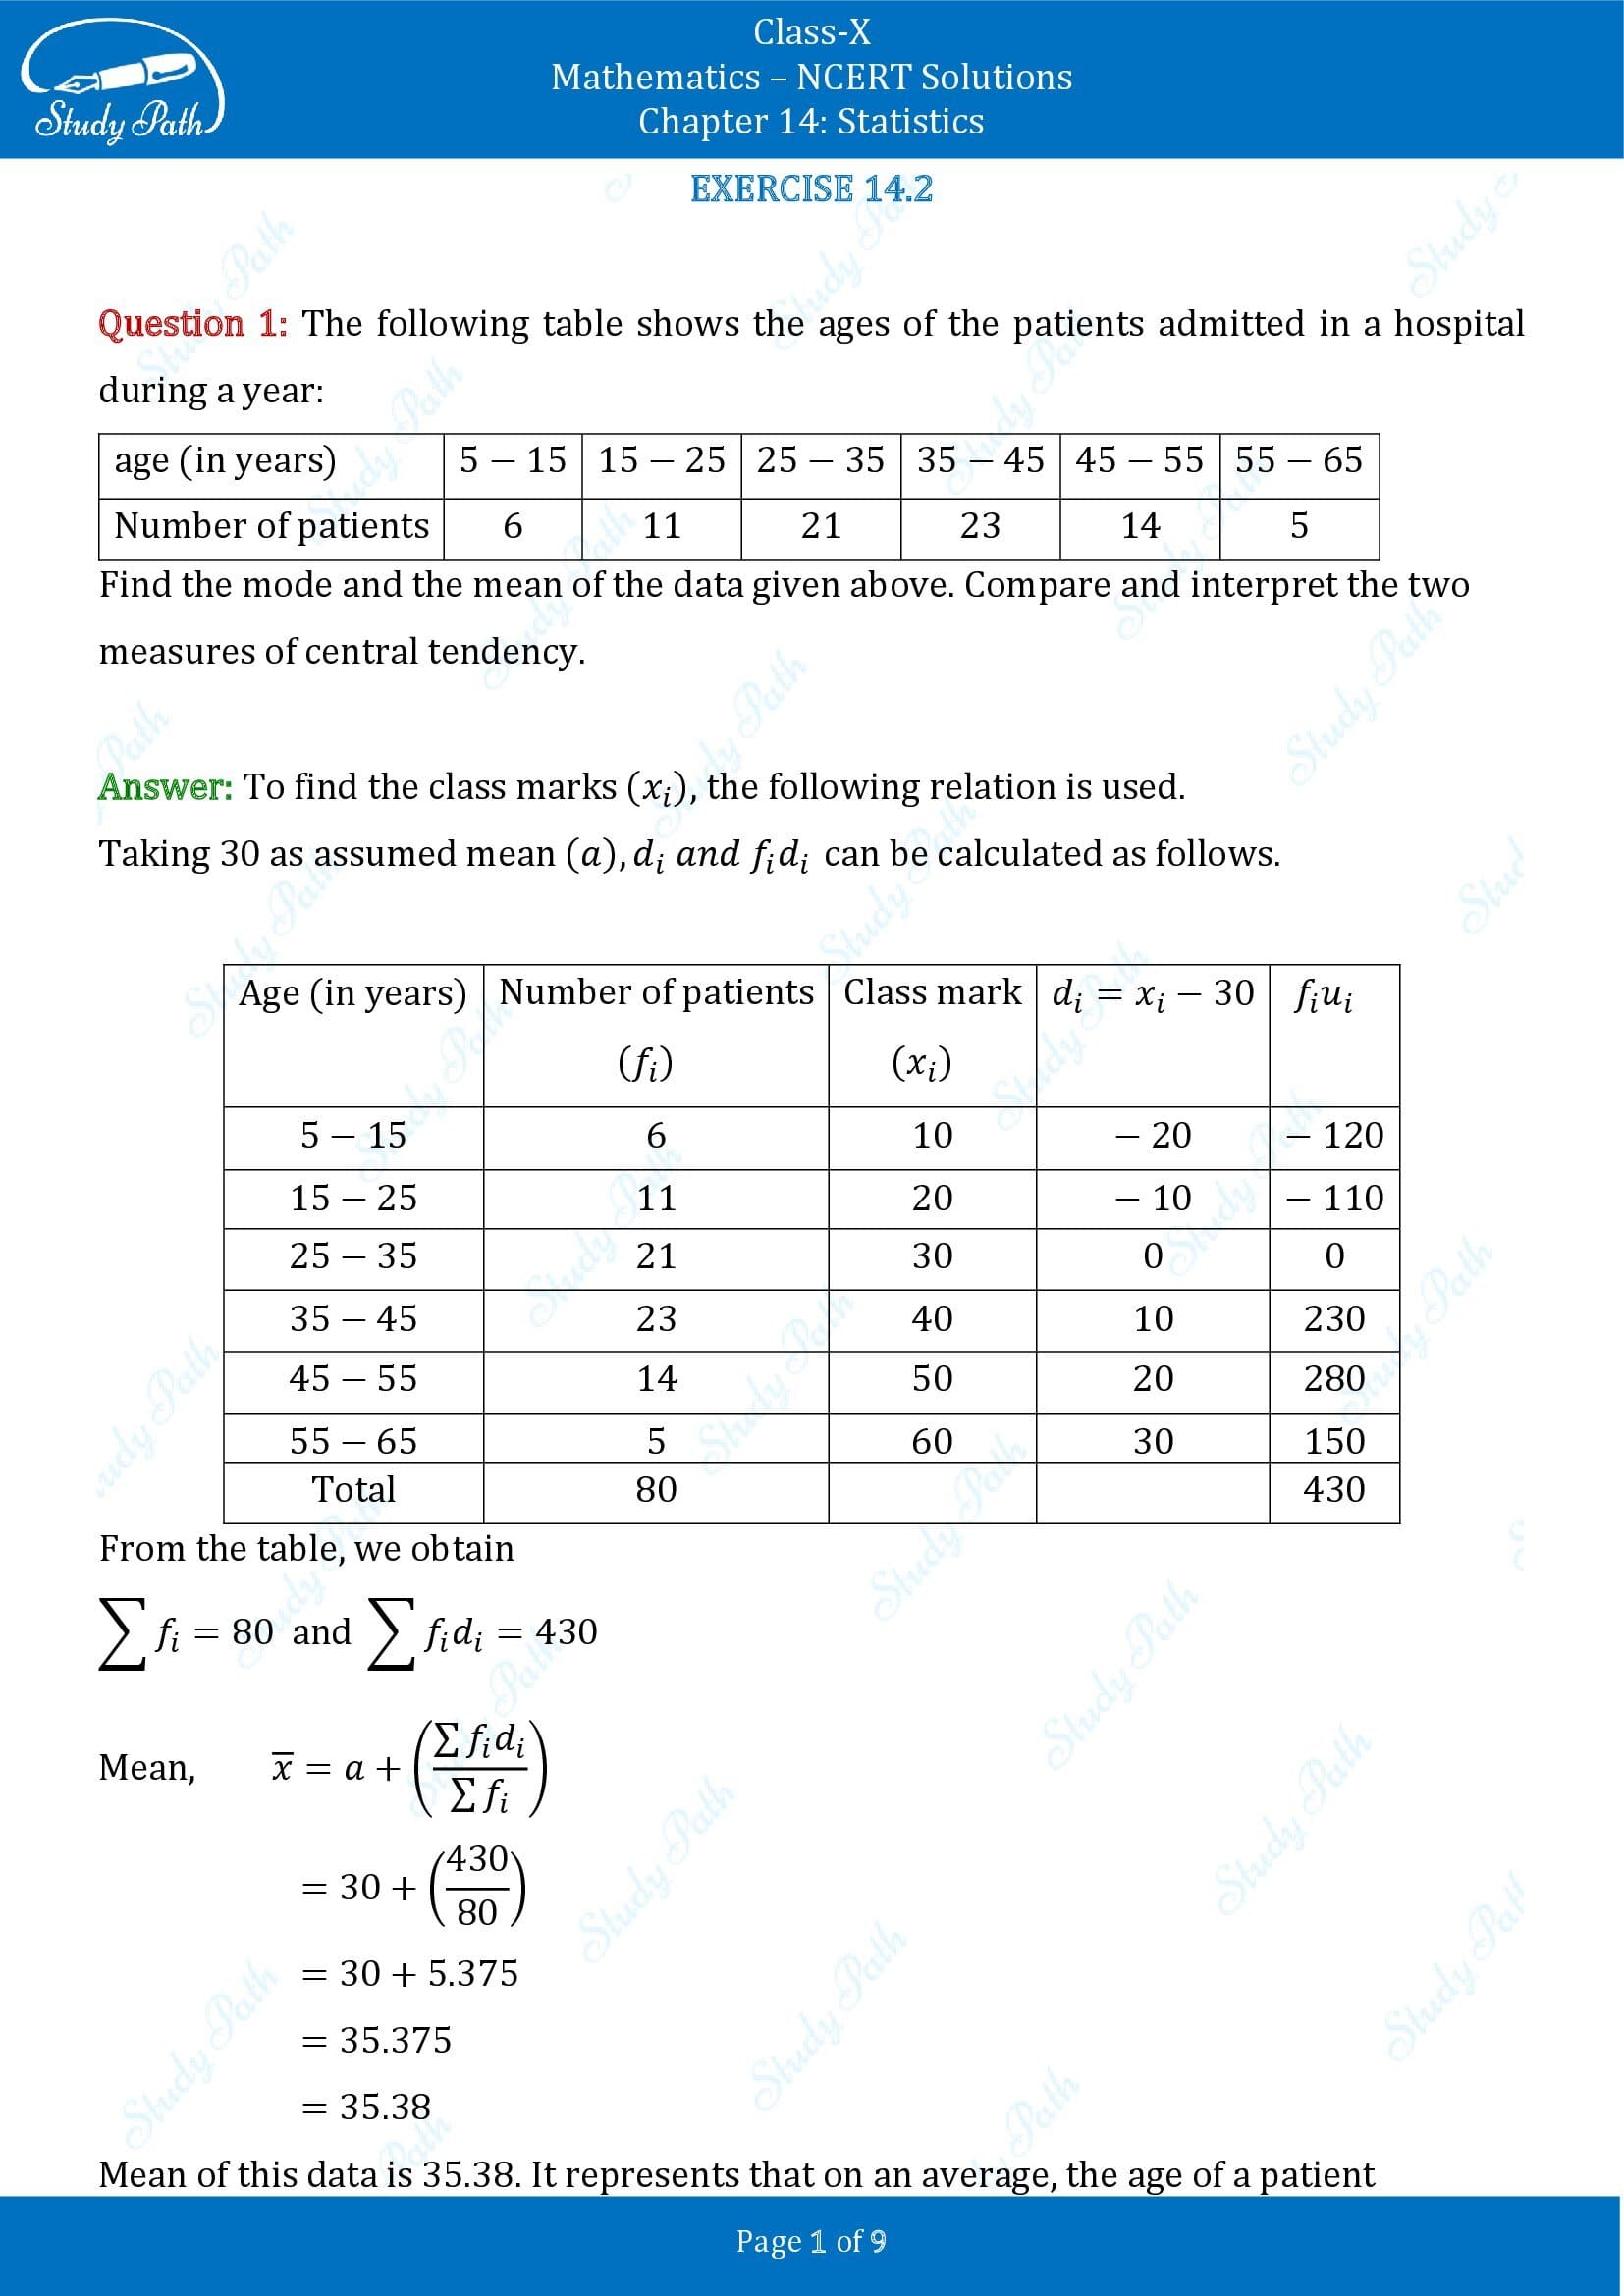 NCERT Solutions for Class 10 Maths Chapter 14 Statistics Exercise 14.2 00001